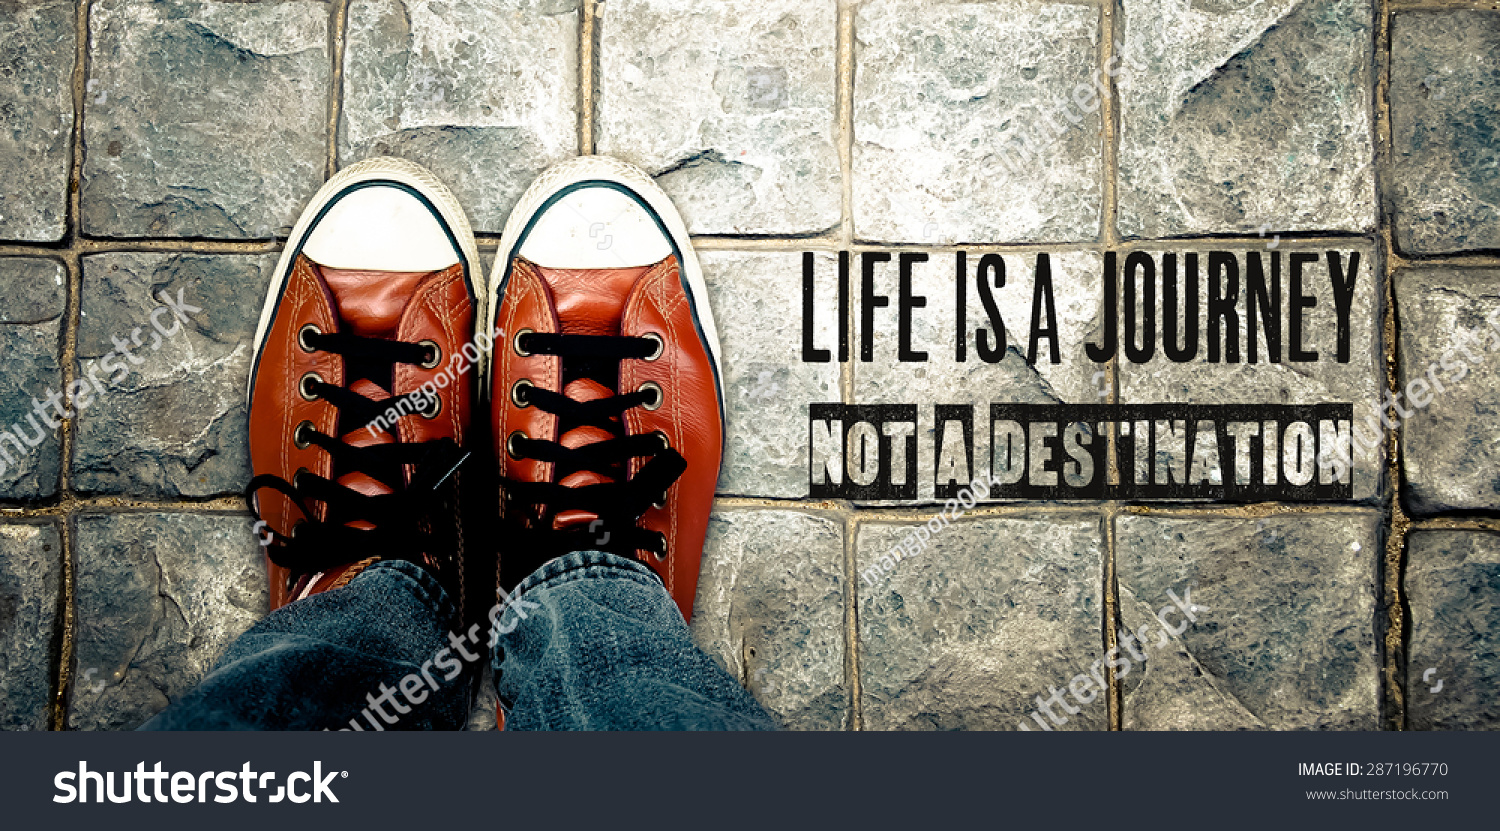 Life is a journey not a destination Inspiration quote